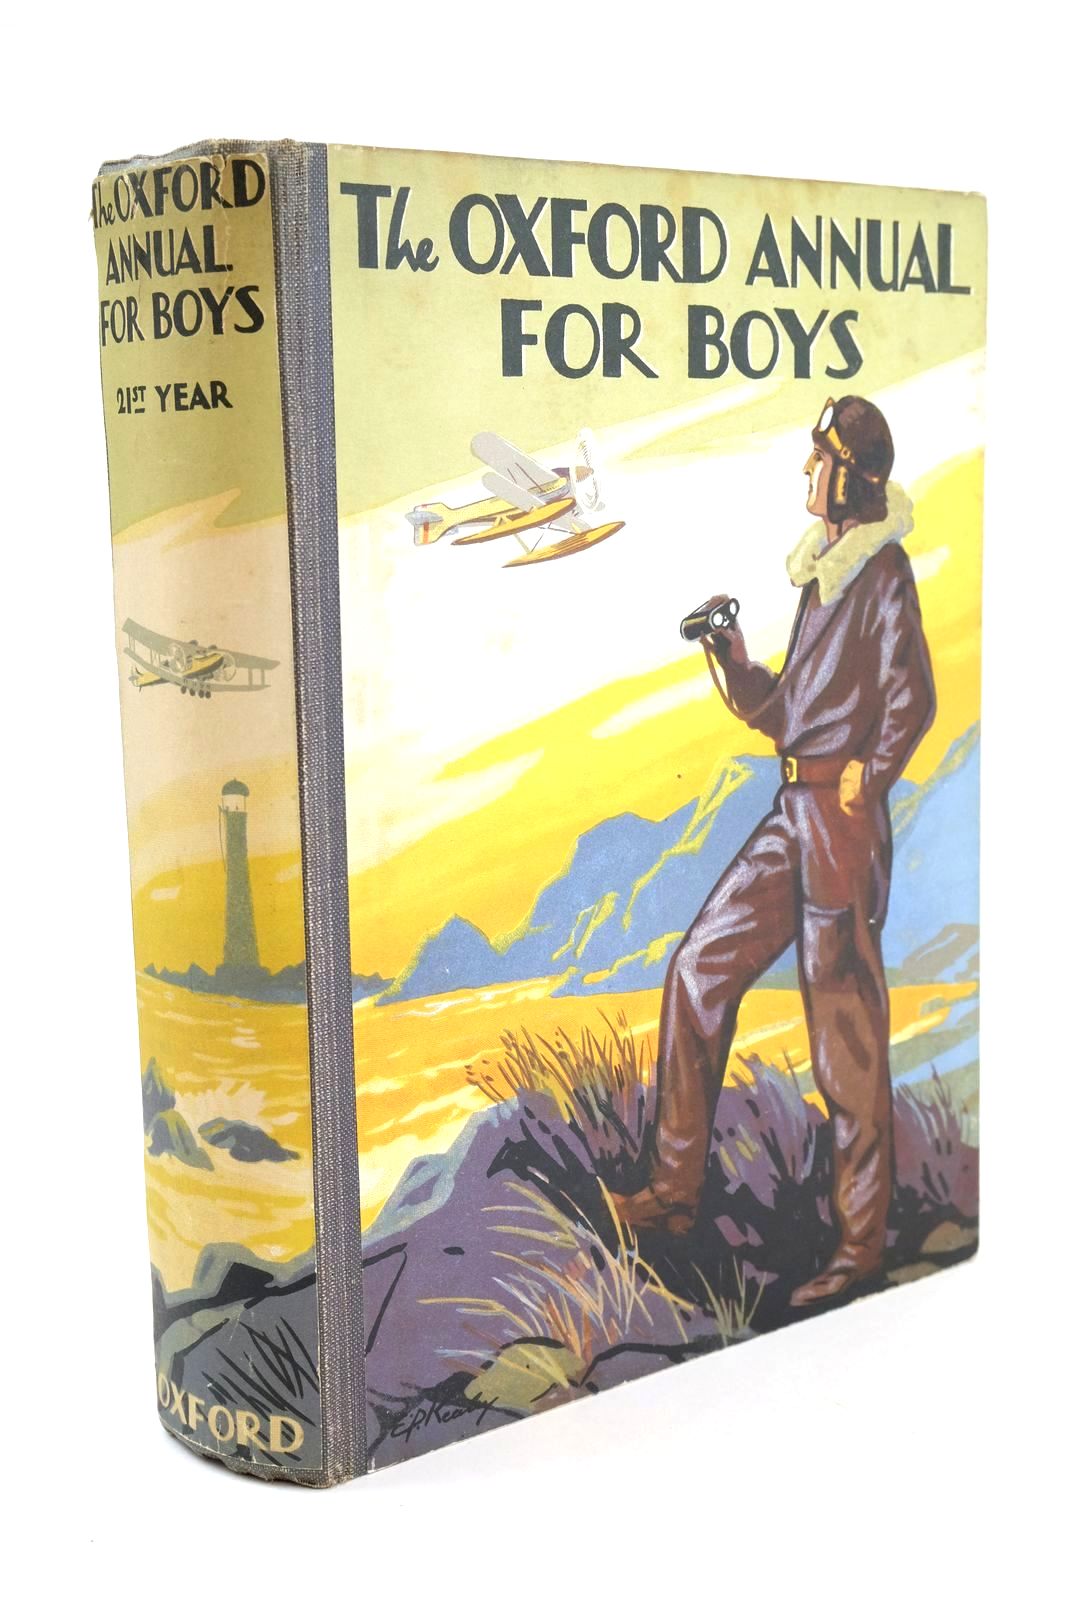 Photo of THE OXFORD ANNUAL FOR BOYS 21ST YEAR written by Strang, Herbert Bourne, Lawrence R. Hadath, Gunby Selim, et al, illustrated by Wigfull, W. Edward Bates, Leo Hamilton, W. Bryce et al., published by Oxford University Press, Humphrey Milford (STOCK CODE: 1324970)  for sale by Stella & Rose's Books